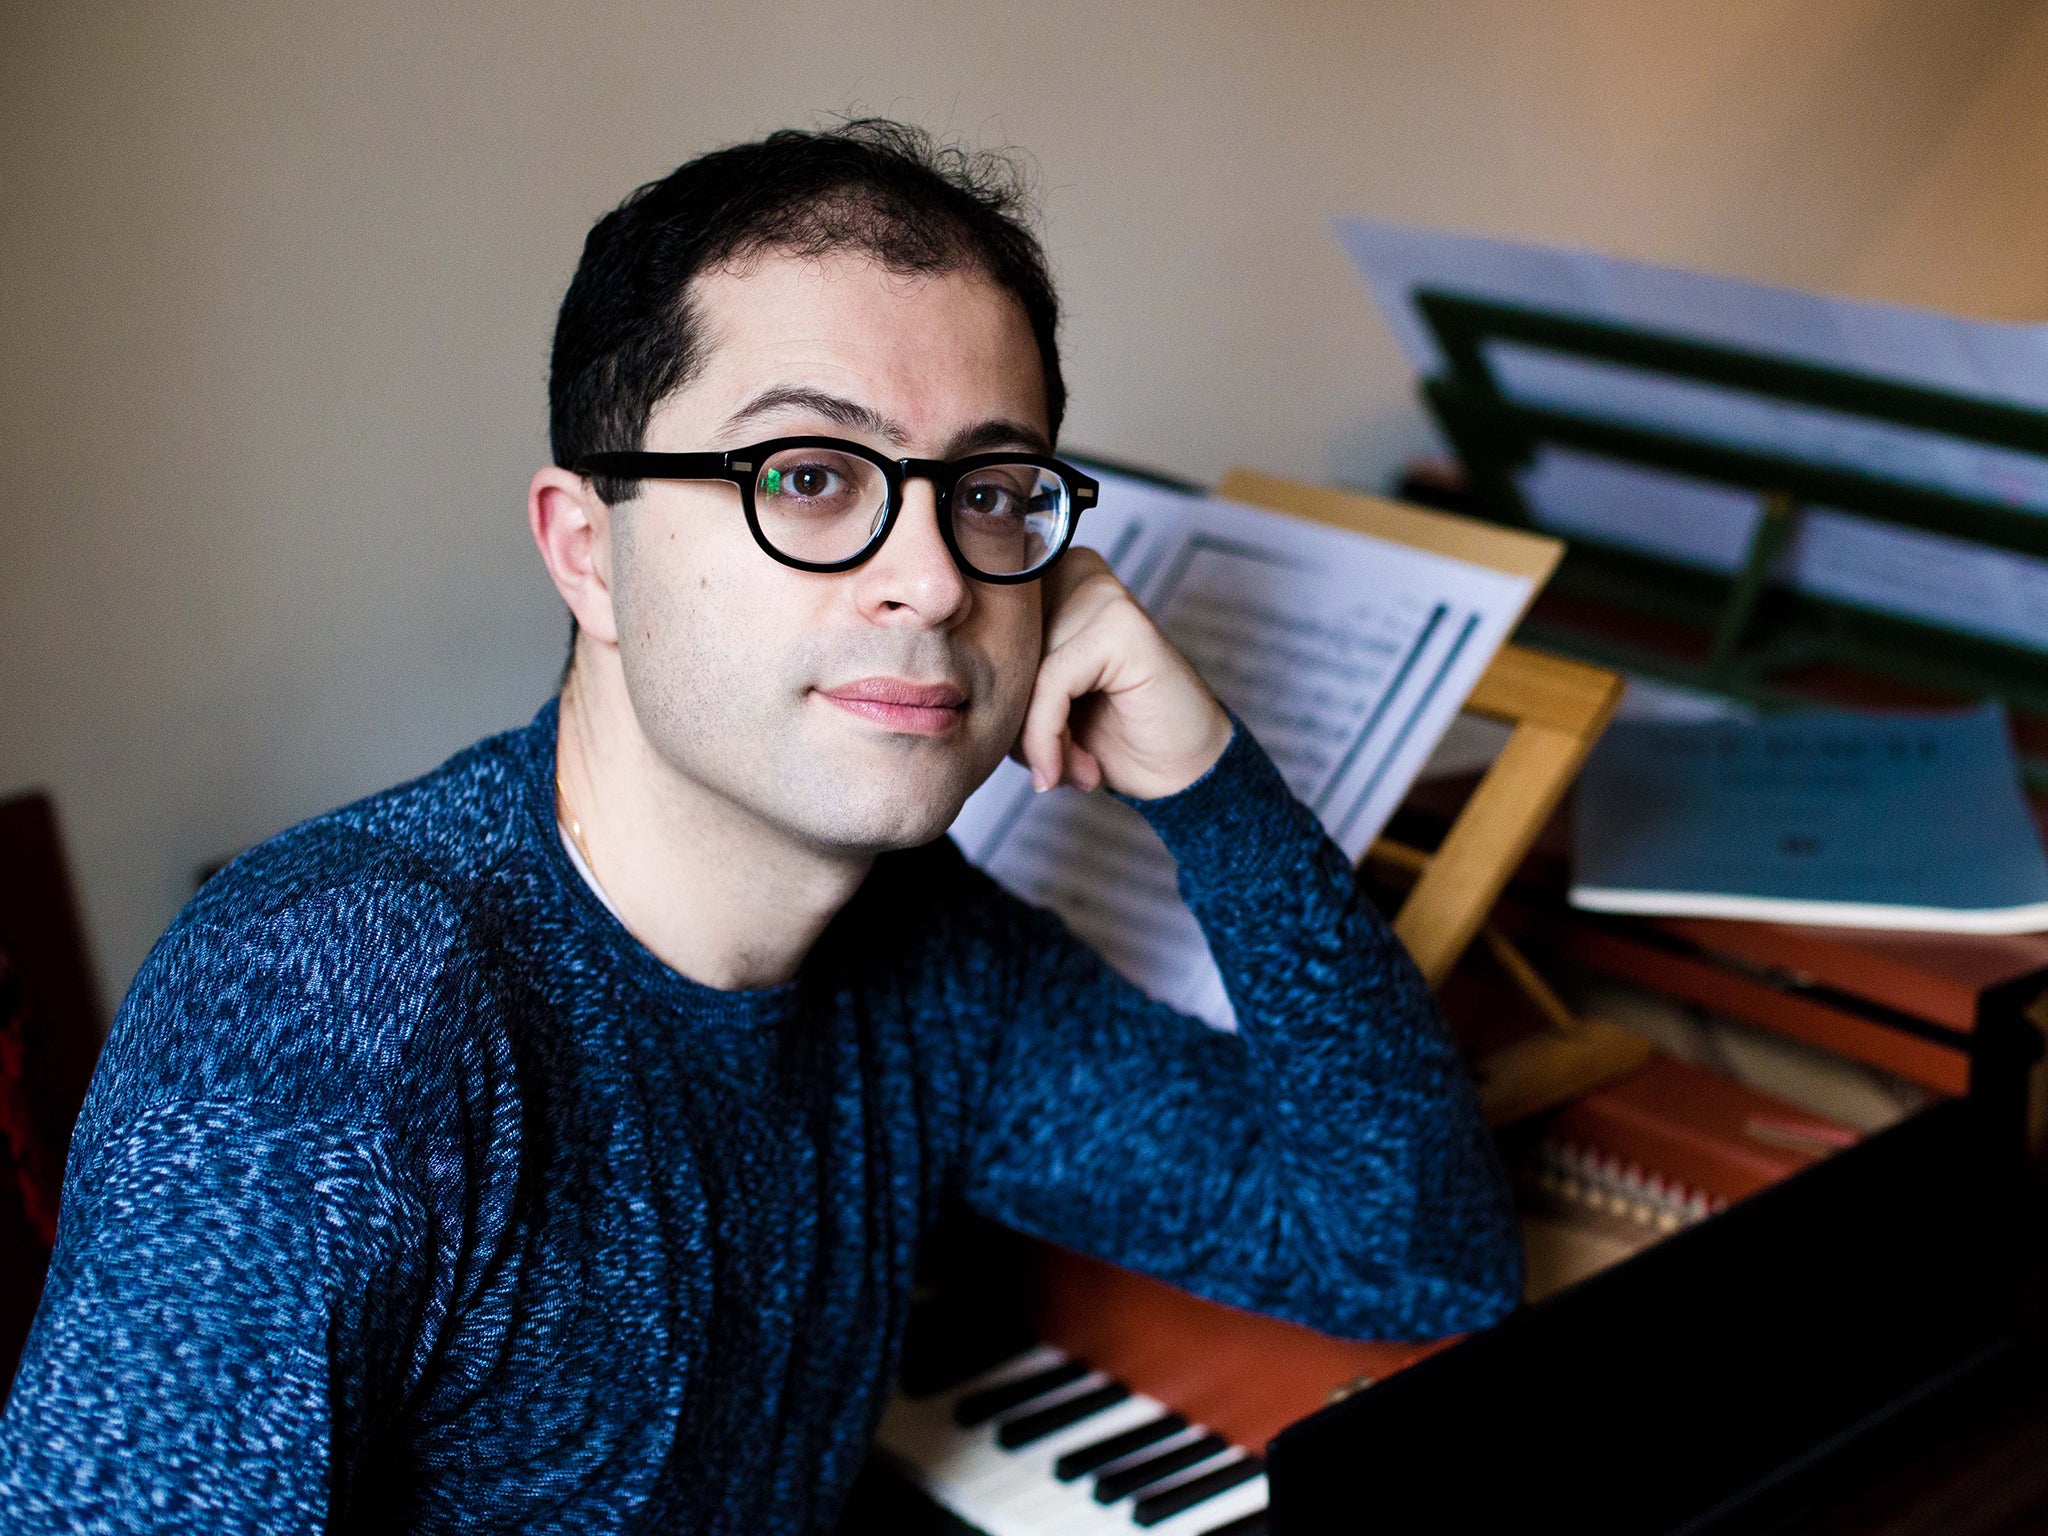 Mahan Esfahani, Iranian-American harpsichordist; he is the first harpsichordist named as a BBC Radio 3 New Generation Artist. As a concerto soloist and recitalist, he has gained an international reputation. Photographed in his studio near Stockwell.